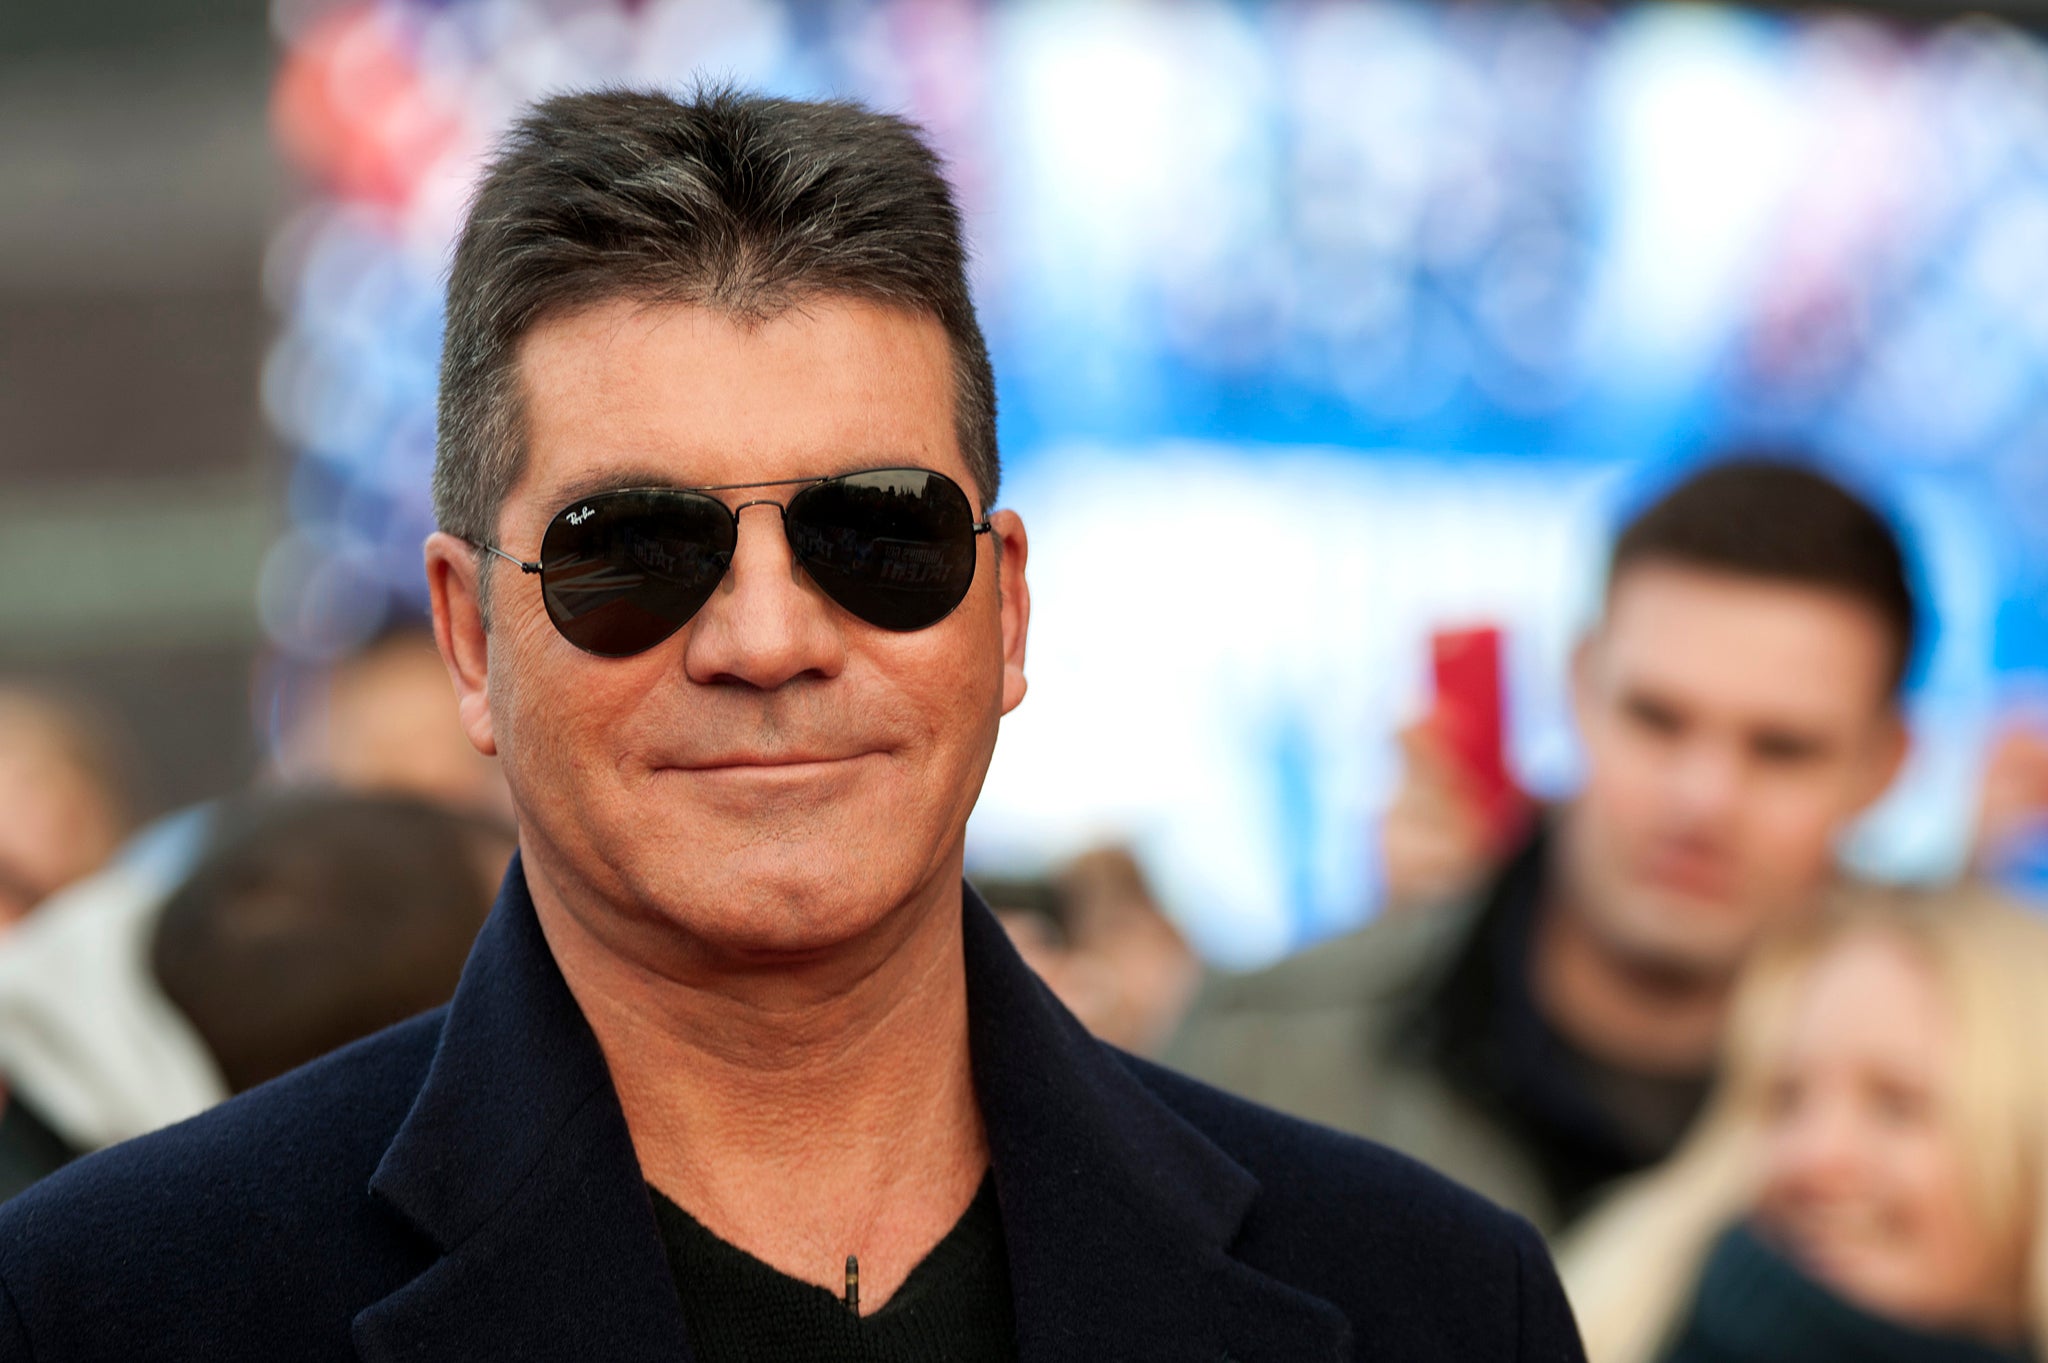 TV mogul Simon Cowell will not let 'The X Factor' die without a fight